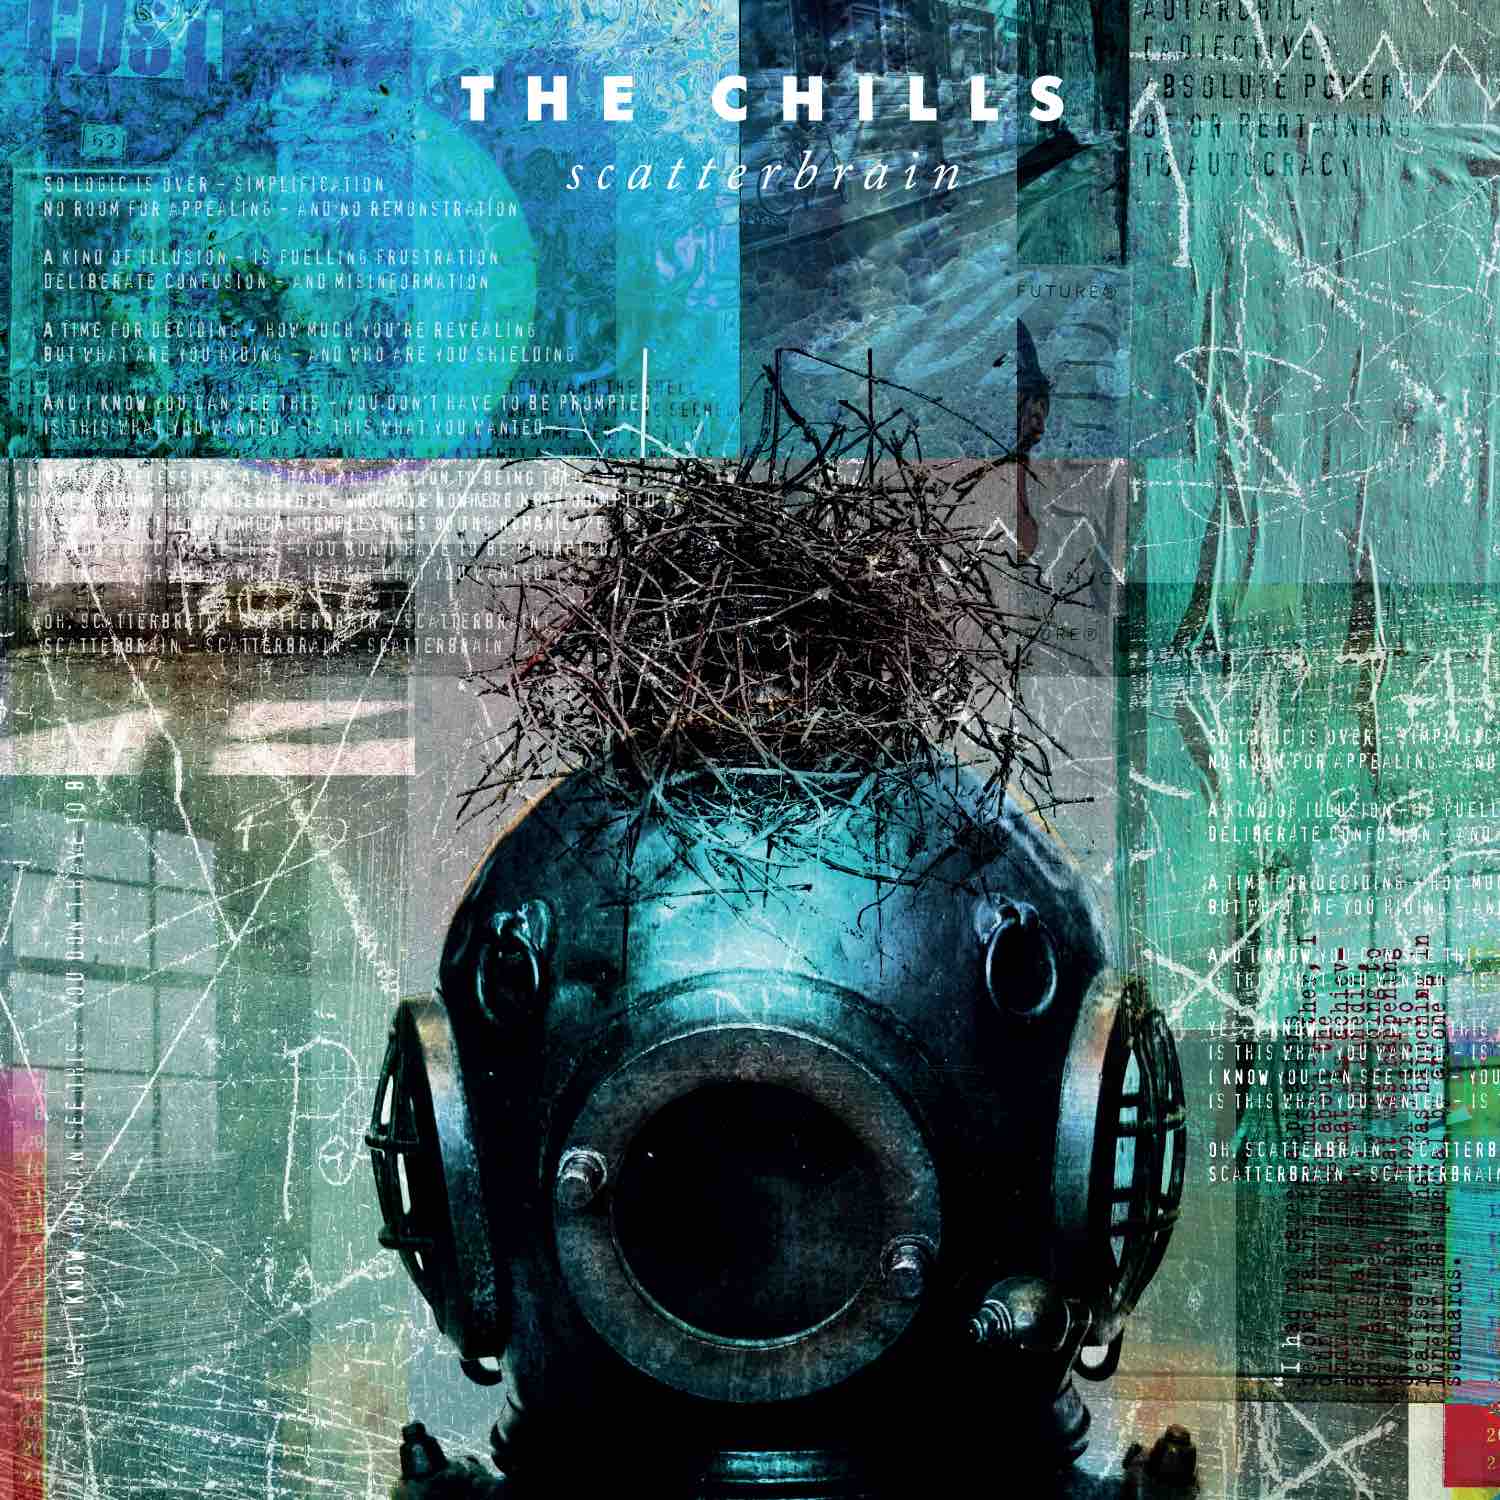 Fire-TheChills-Scatterbrain-LP-Coverideas.indd